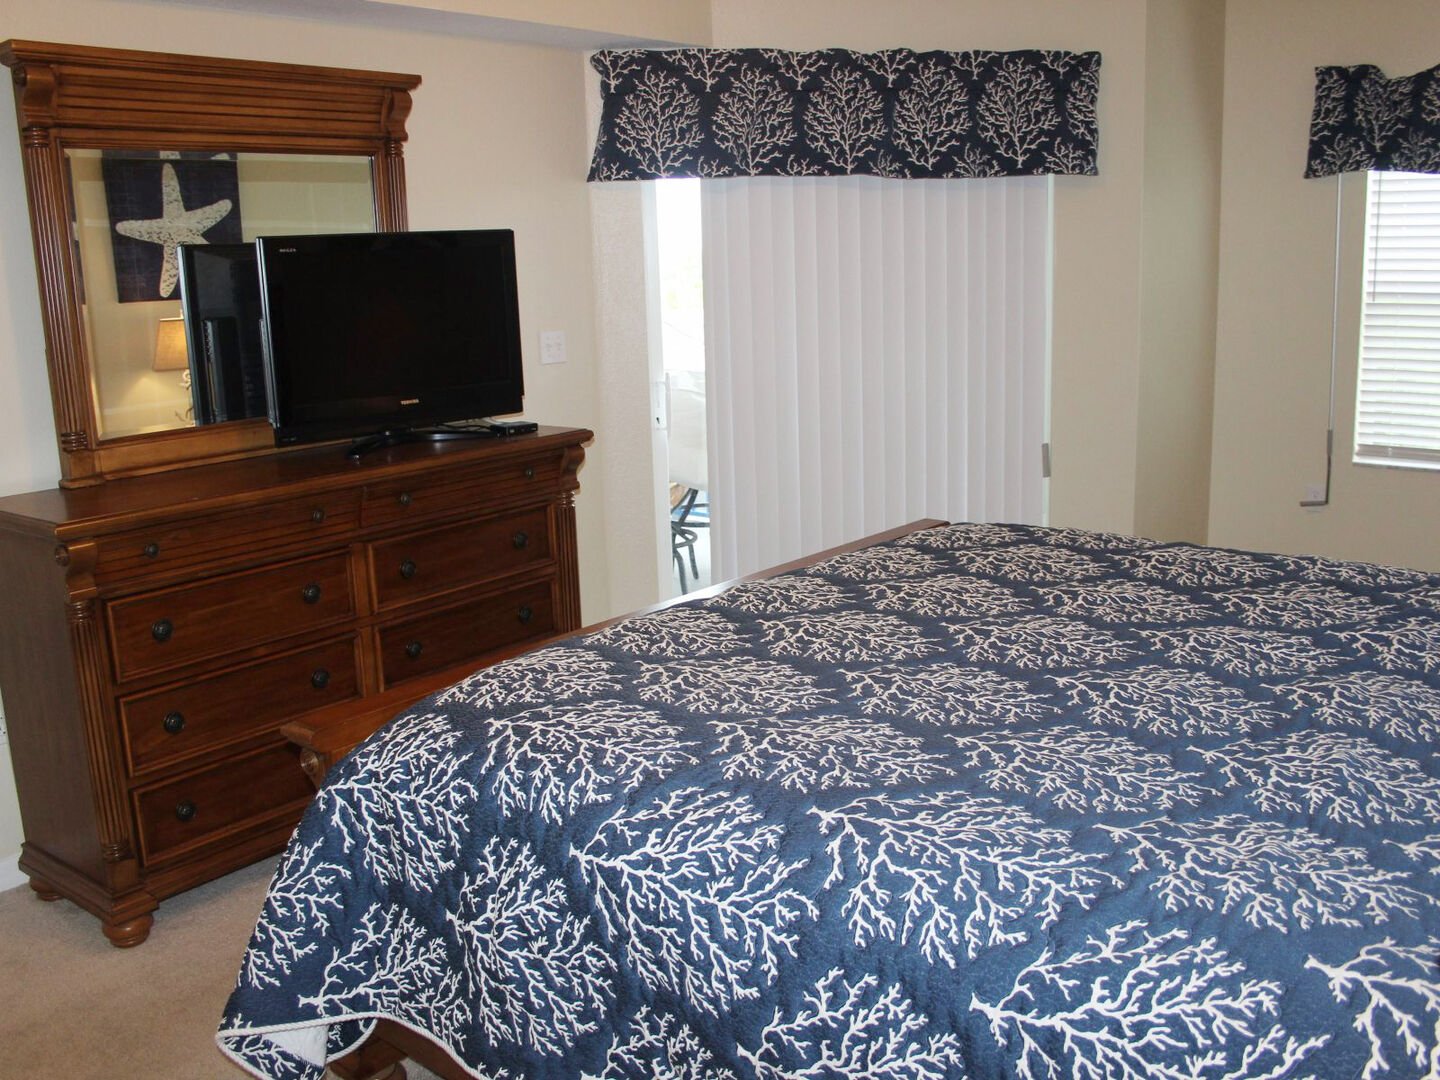 The master bedroom features a flat screen TV, sliders to the patio and walk-in closet.